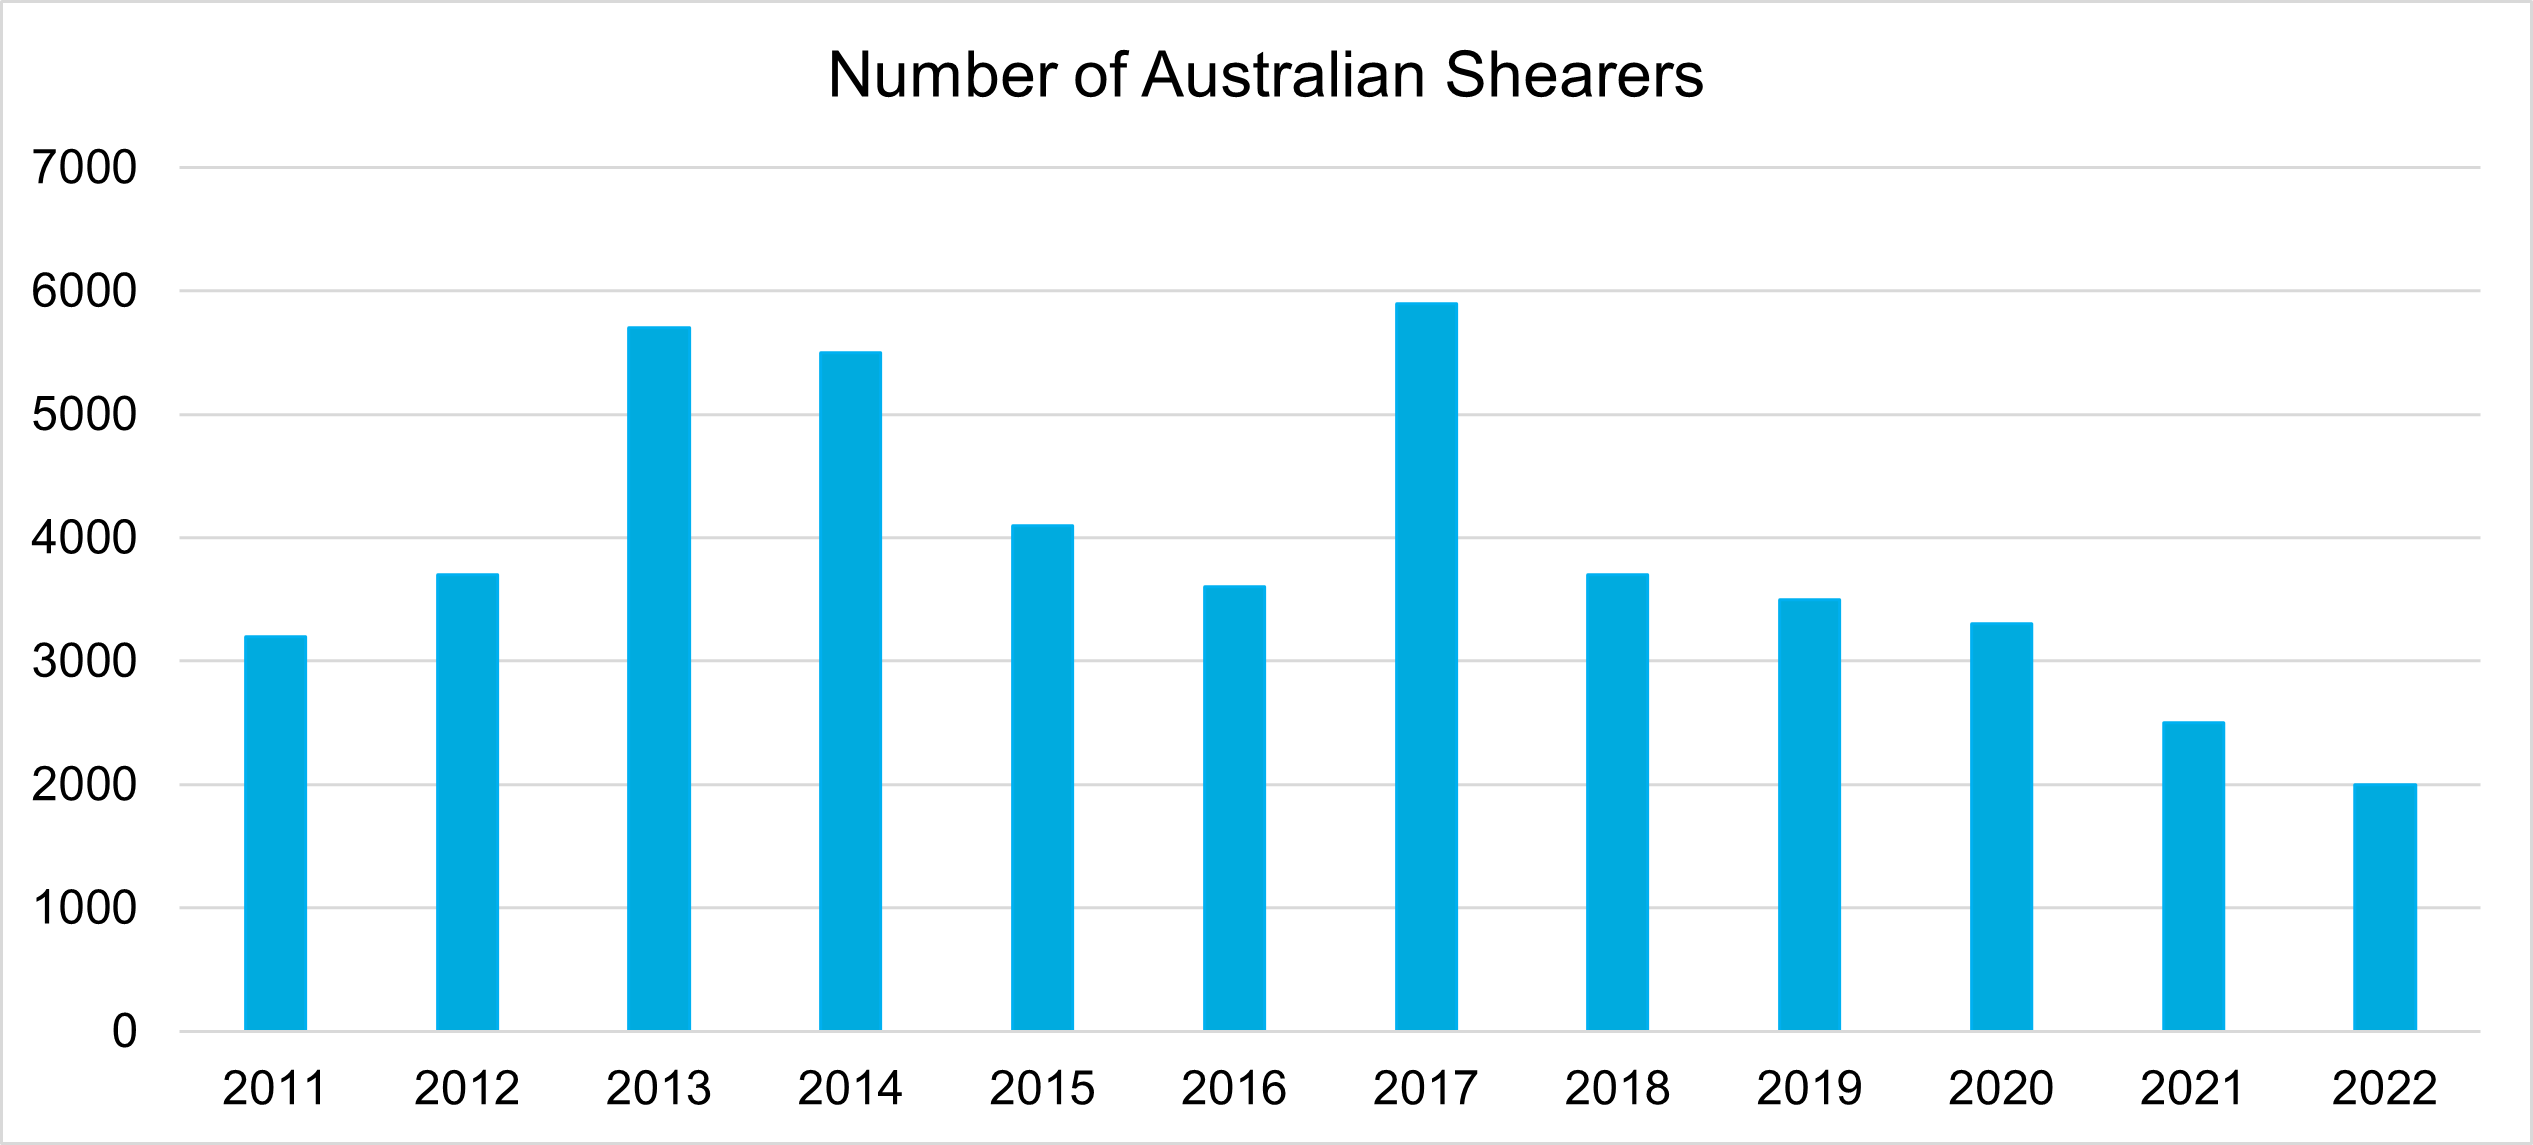 Graph showing the number of Australian shearers from 2011 to 2022. The decline in Australian shearers has been a consistent theme in recent years. 